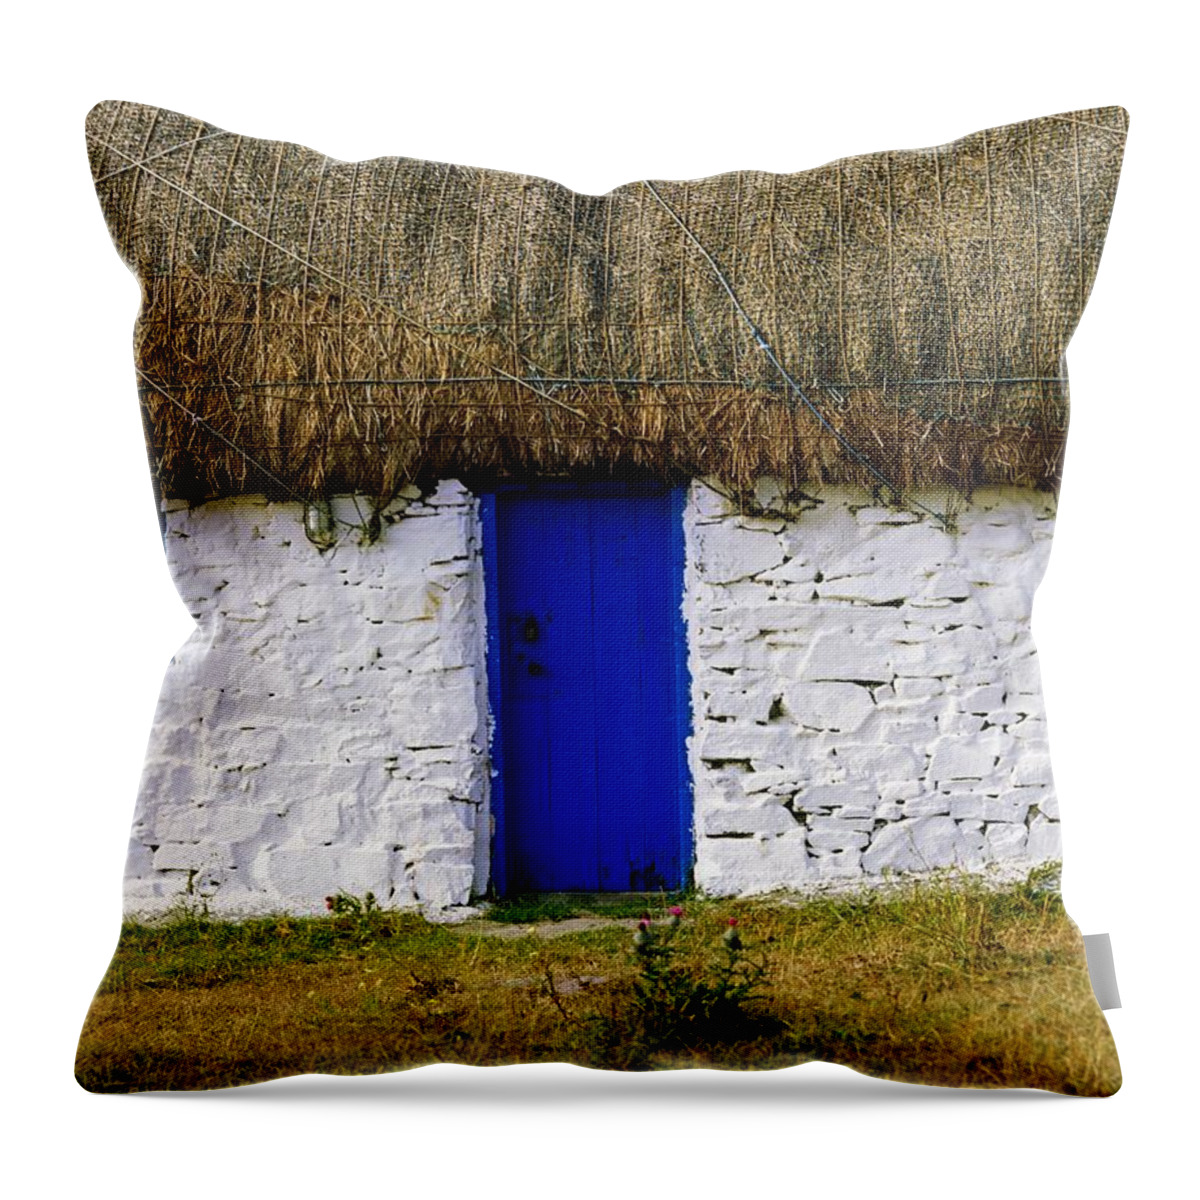 Building Throw Pillow featuring the photograph Traditional Cottages, Co Galway, Ireland by The Irish Image Collection 